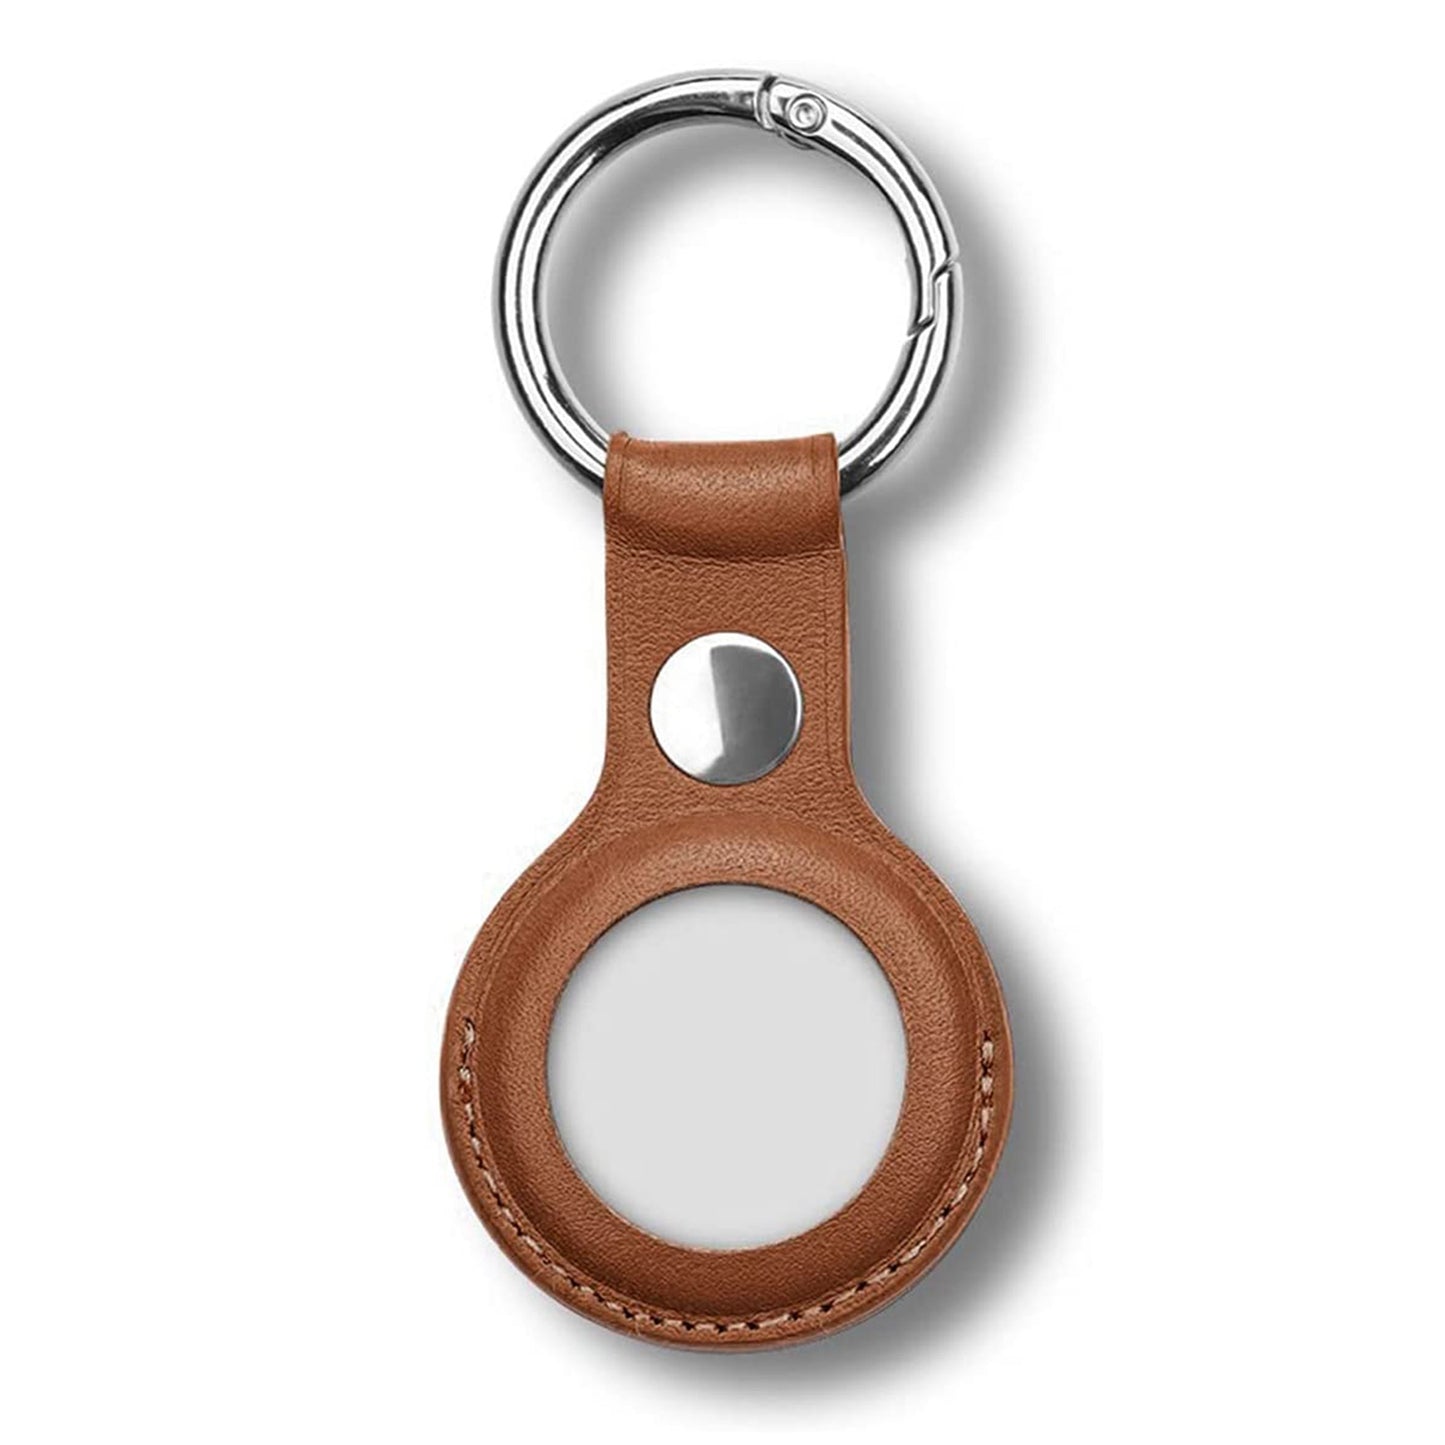 [1 pack] MEZON Brown PU Leather Protective Case Holder for Apple AirTag Tracker with Keychain Ring (Leather, Brown)